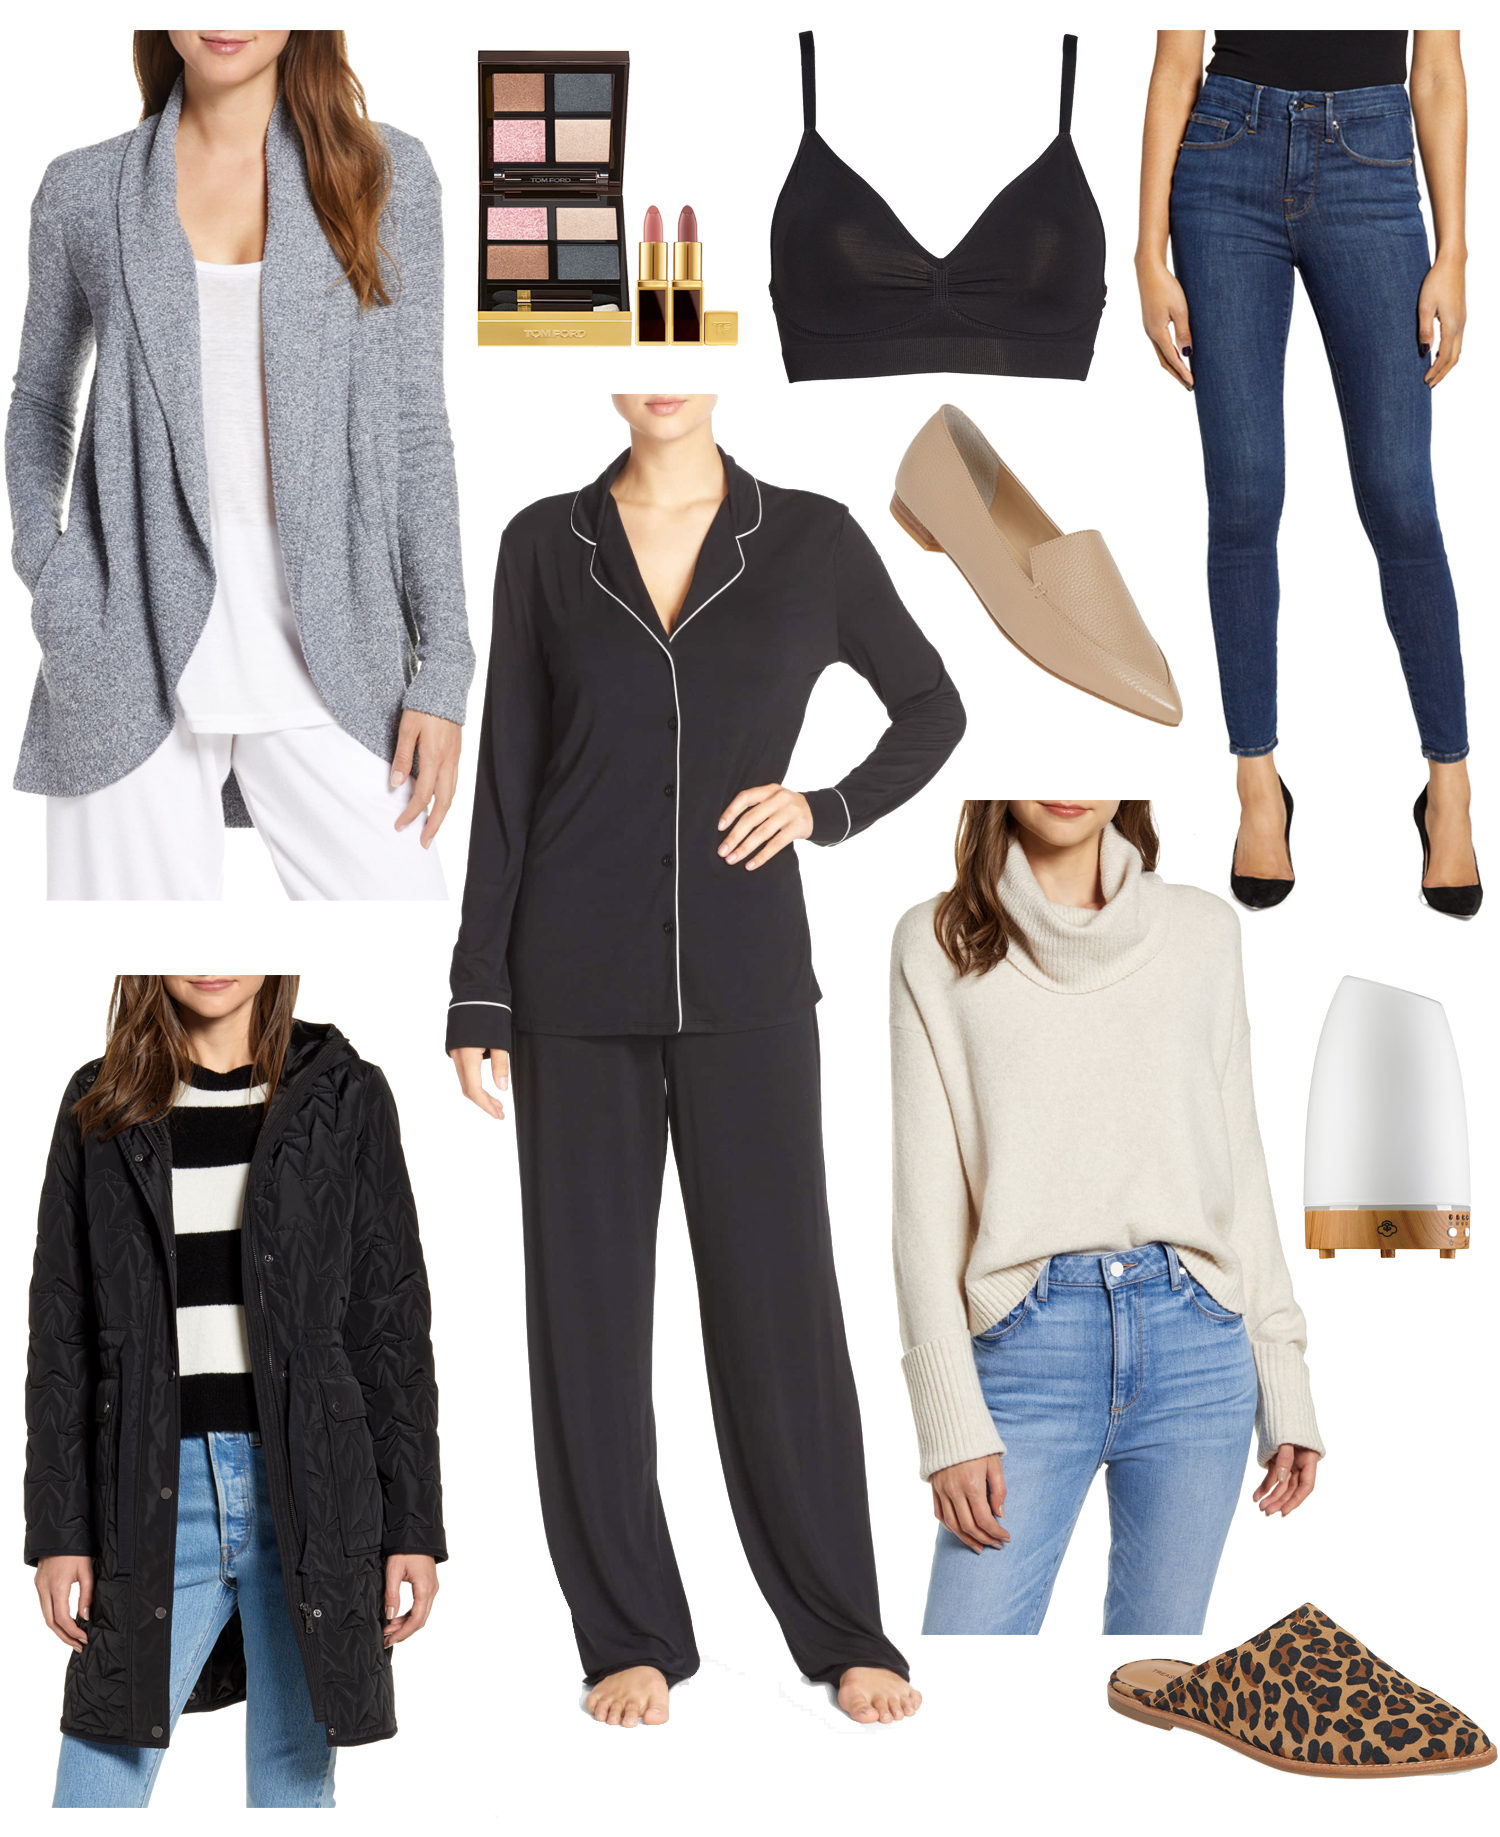 nordstrom-sale-2019-lo-murphy-last-day-to-shop